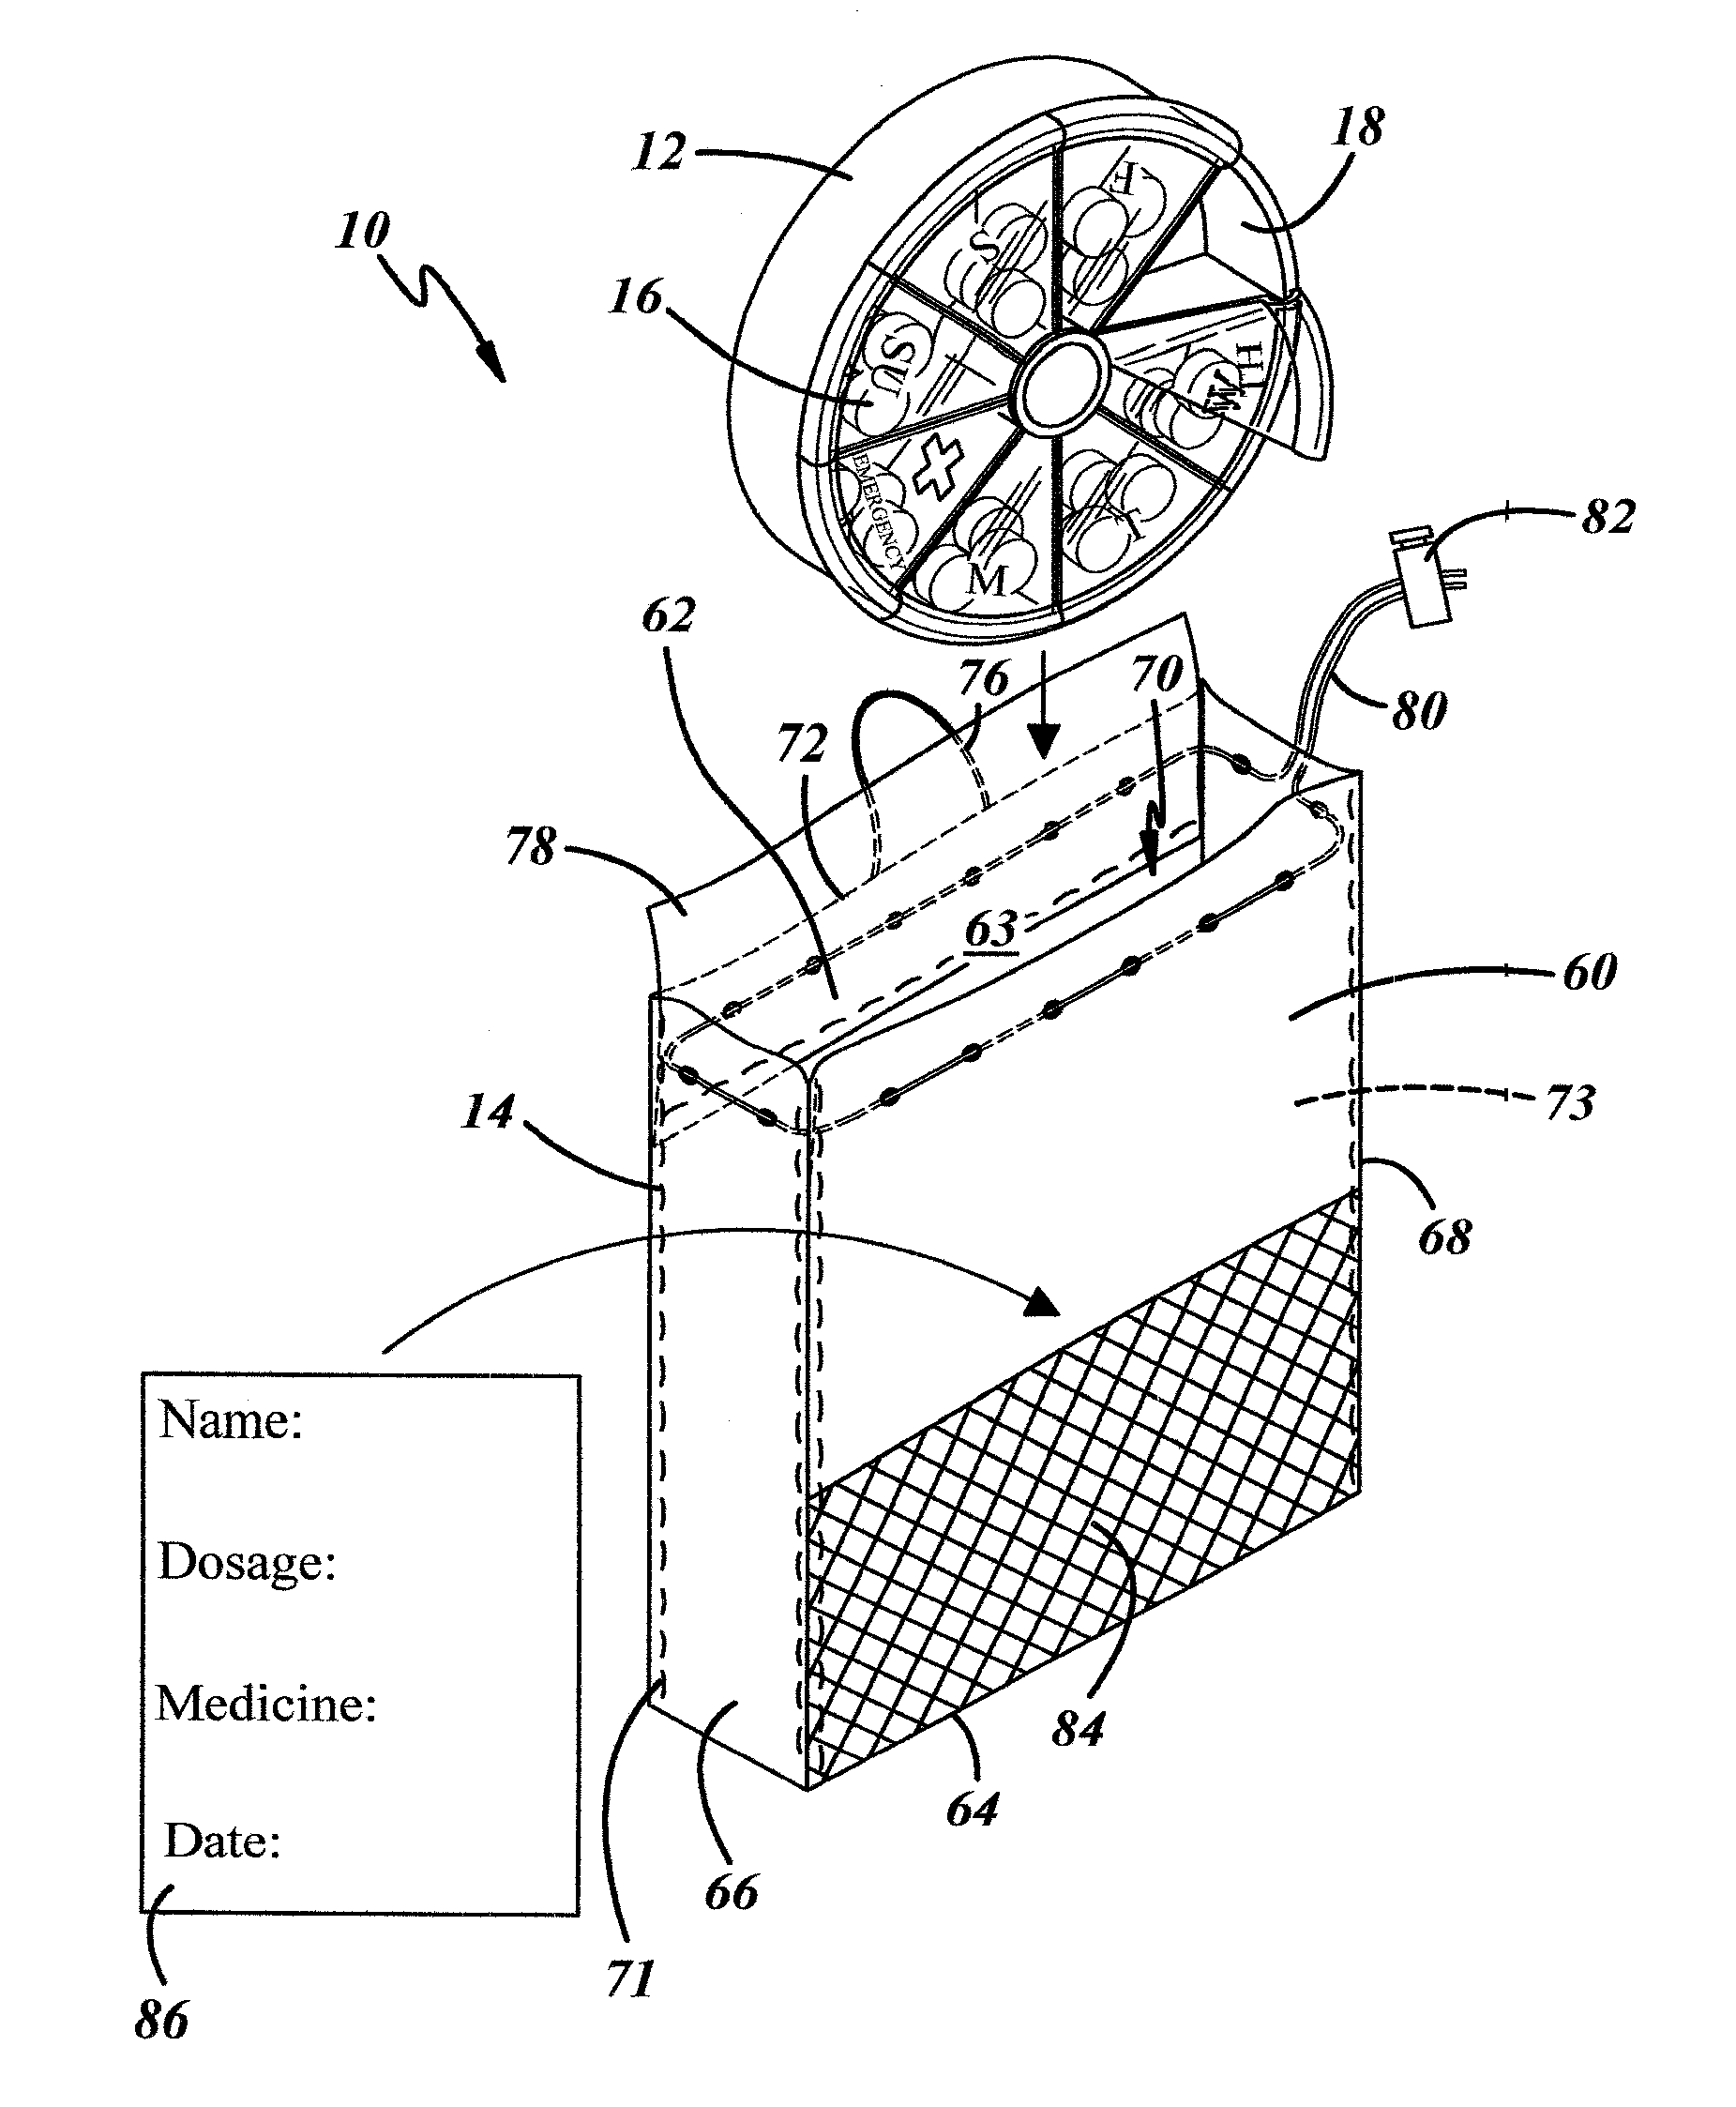 Attachable, portable pet medication carrier having a waterproof medication storage container